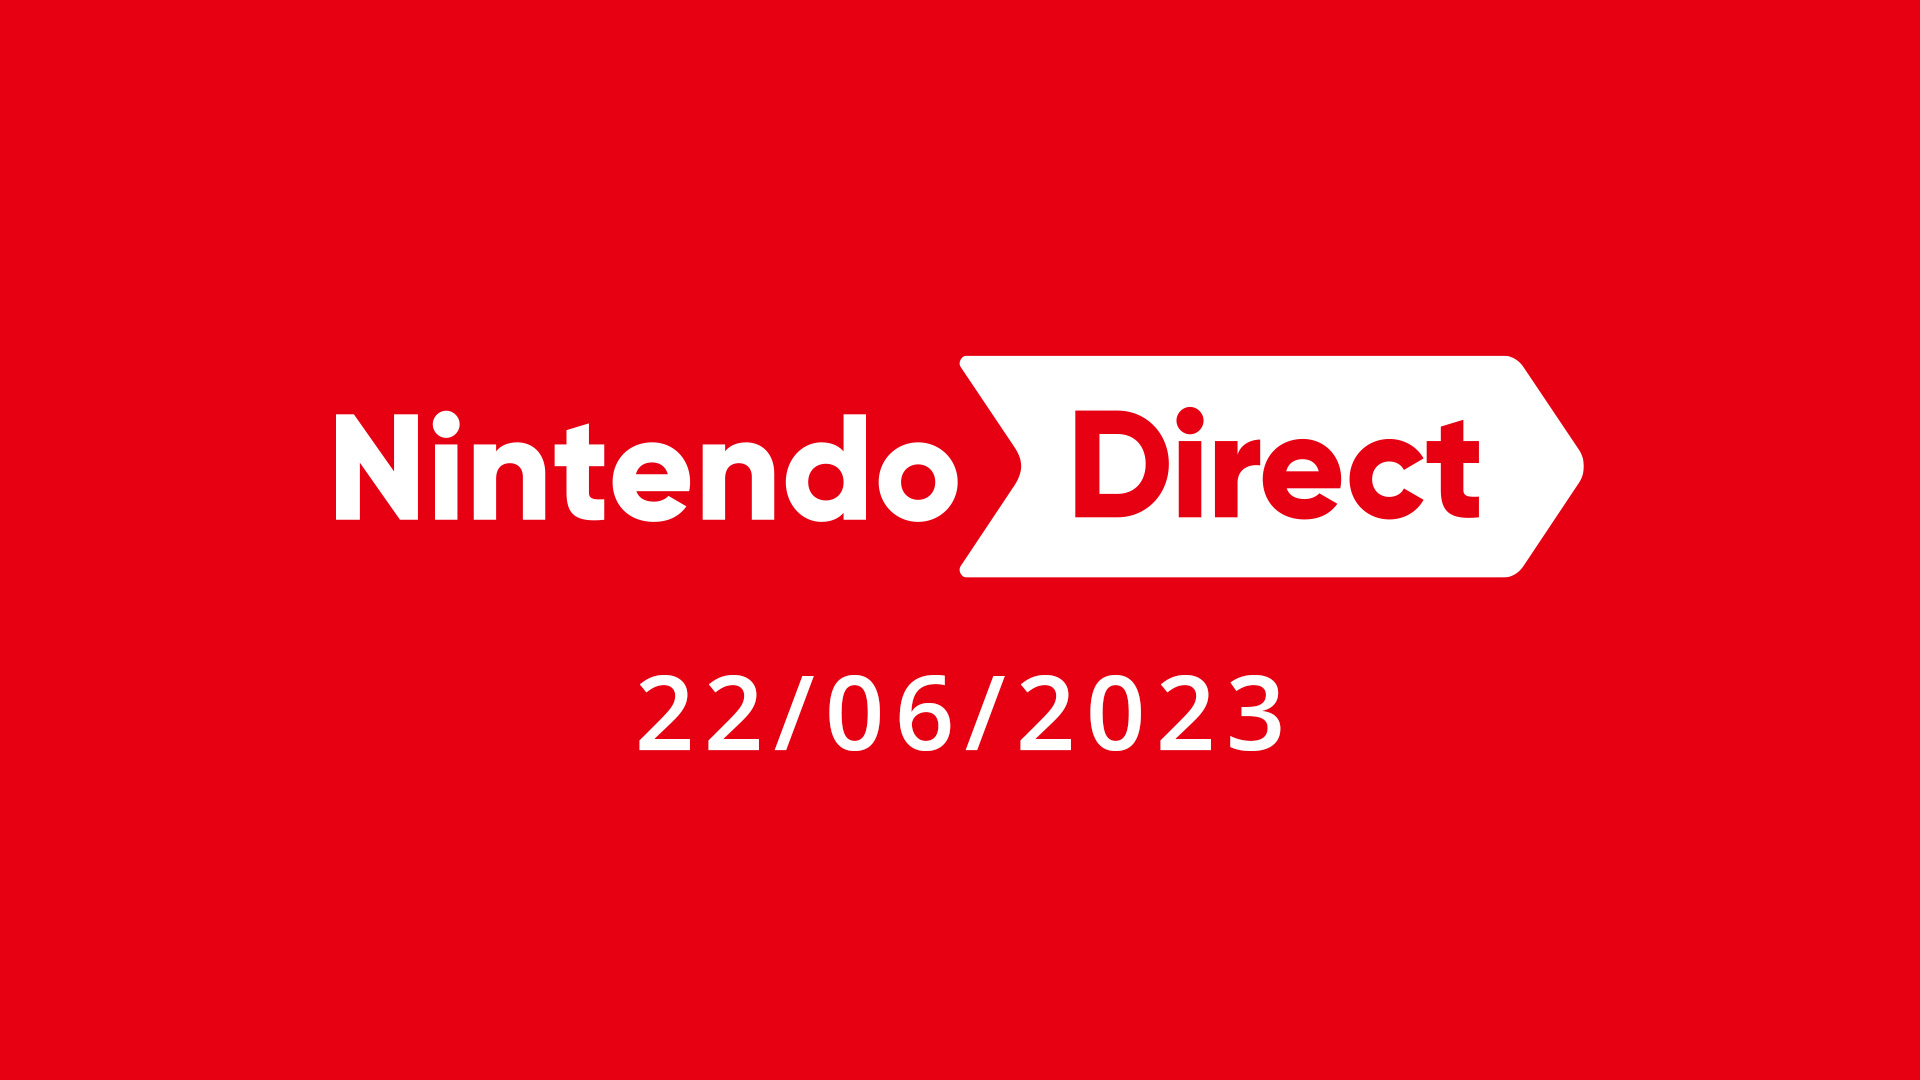 A red and white graphic for the Nintendo Direct on 22/06/2023.